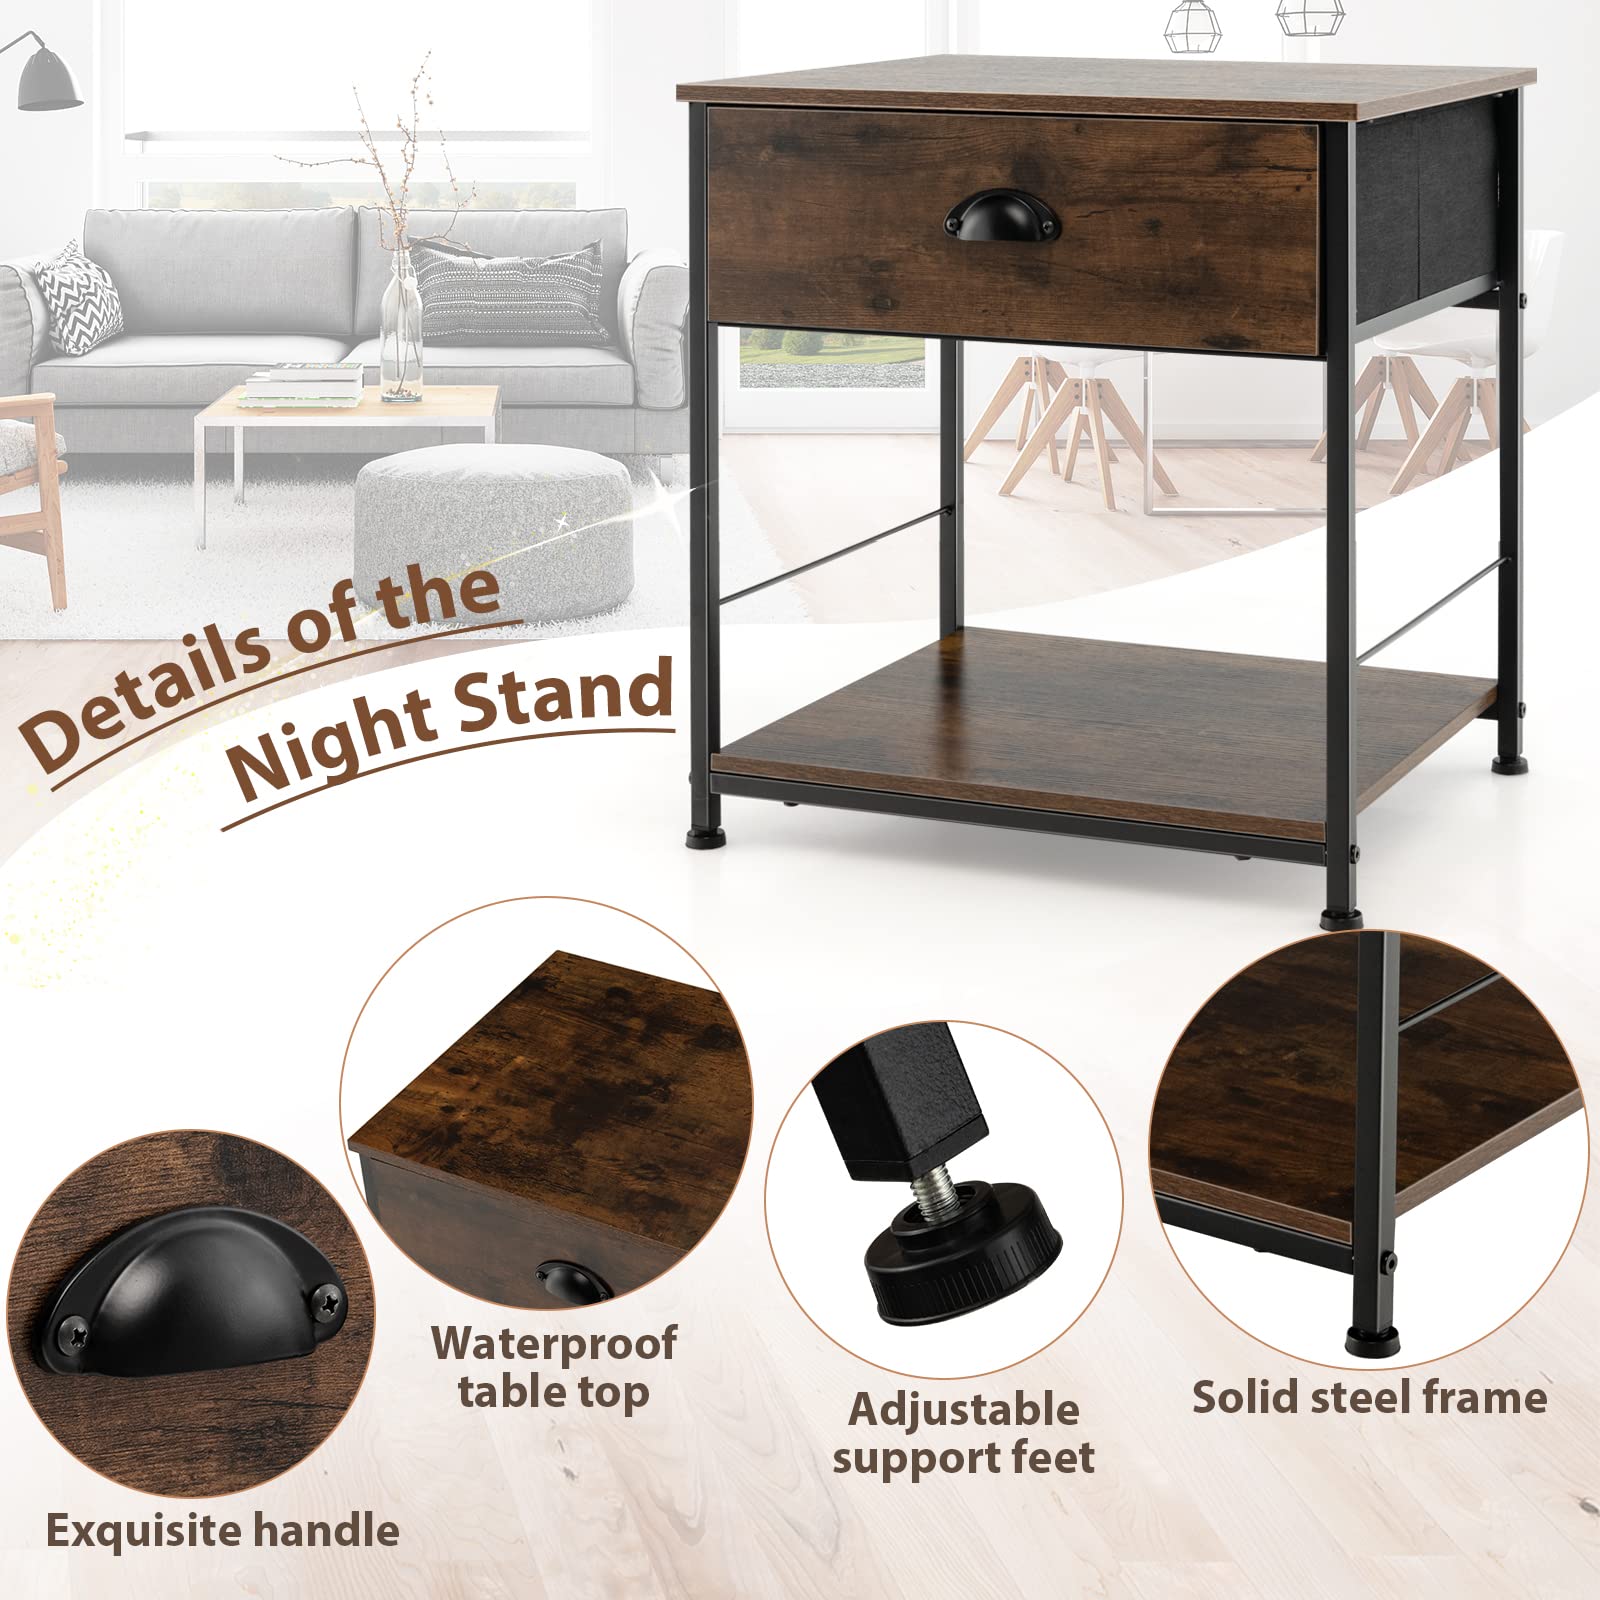 Giantex Nightstand with Drawers, Bedside Table w/Removable Fabric Bins & Pull Handle